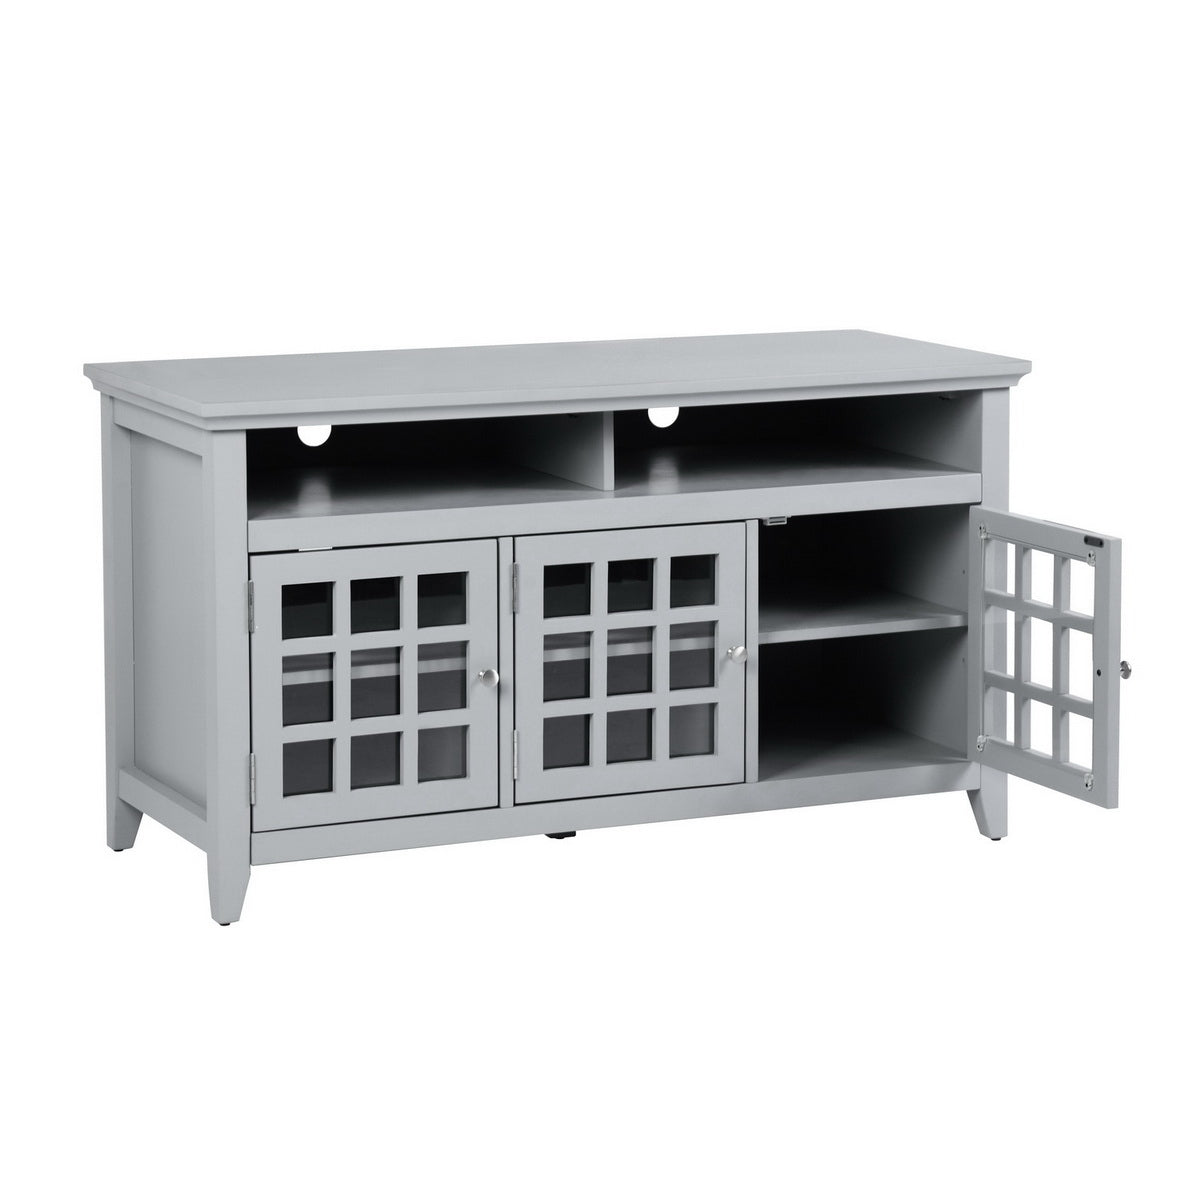 48" TV Stand & Entertainment Center with 3-Door Cabinet, Grey